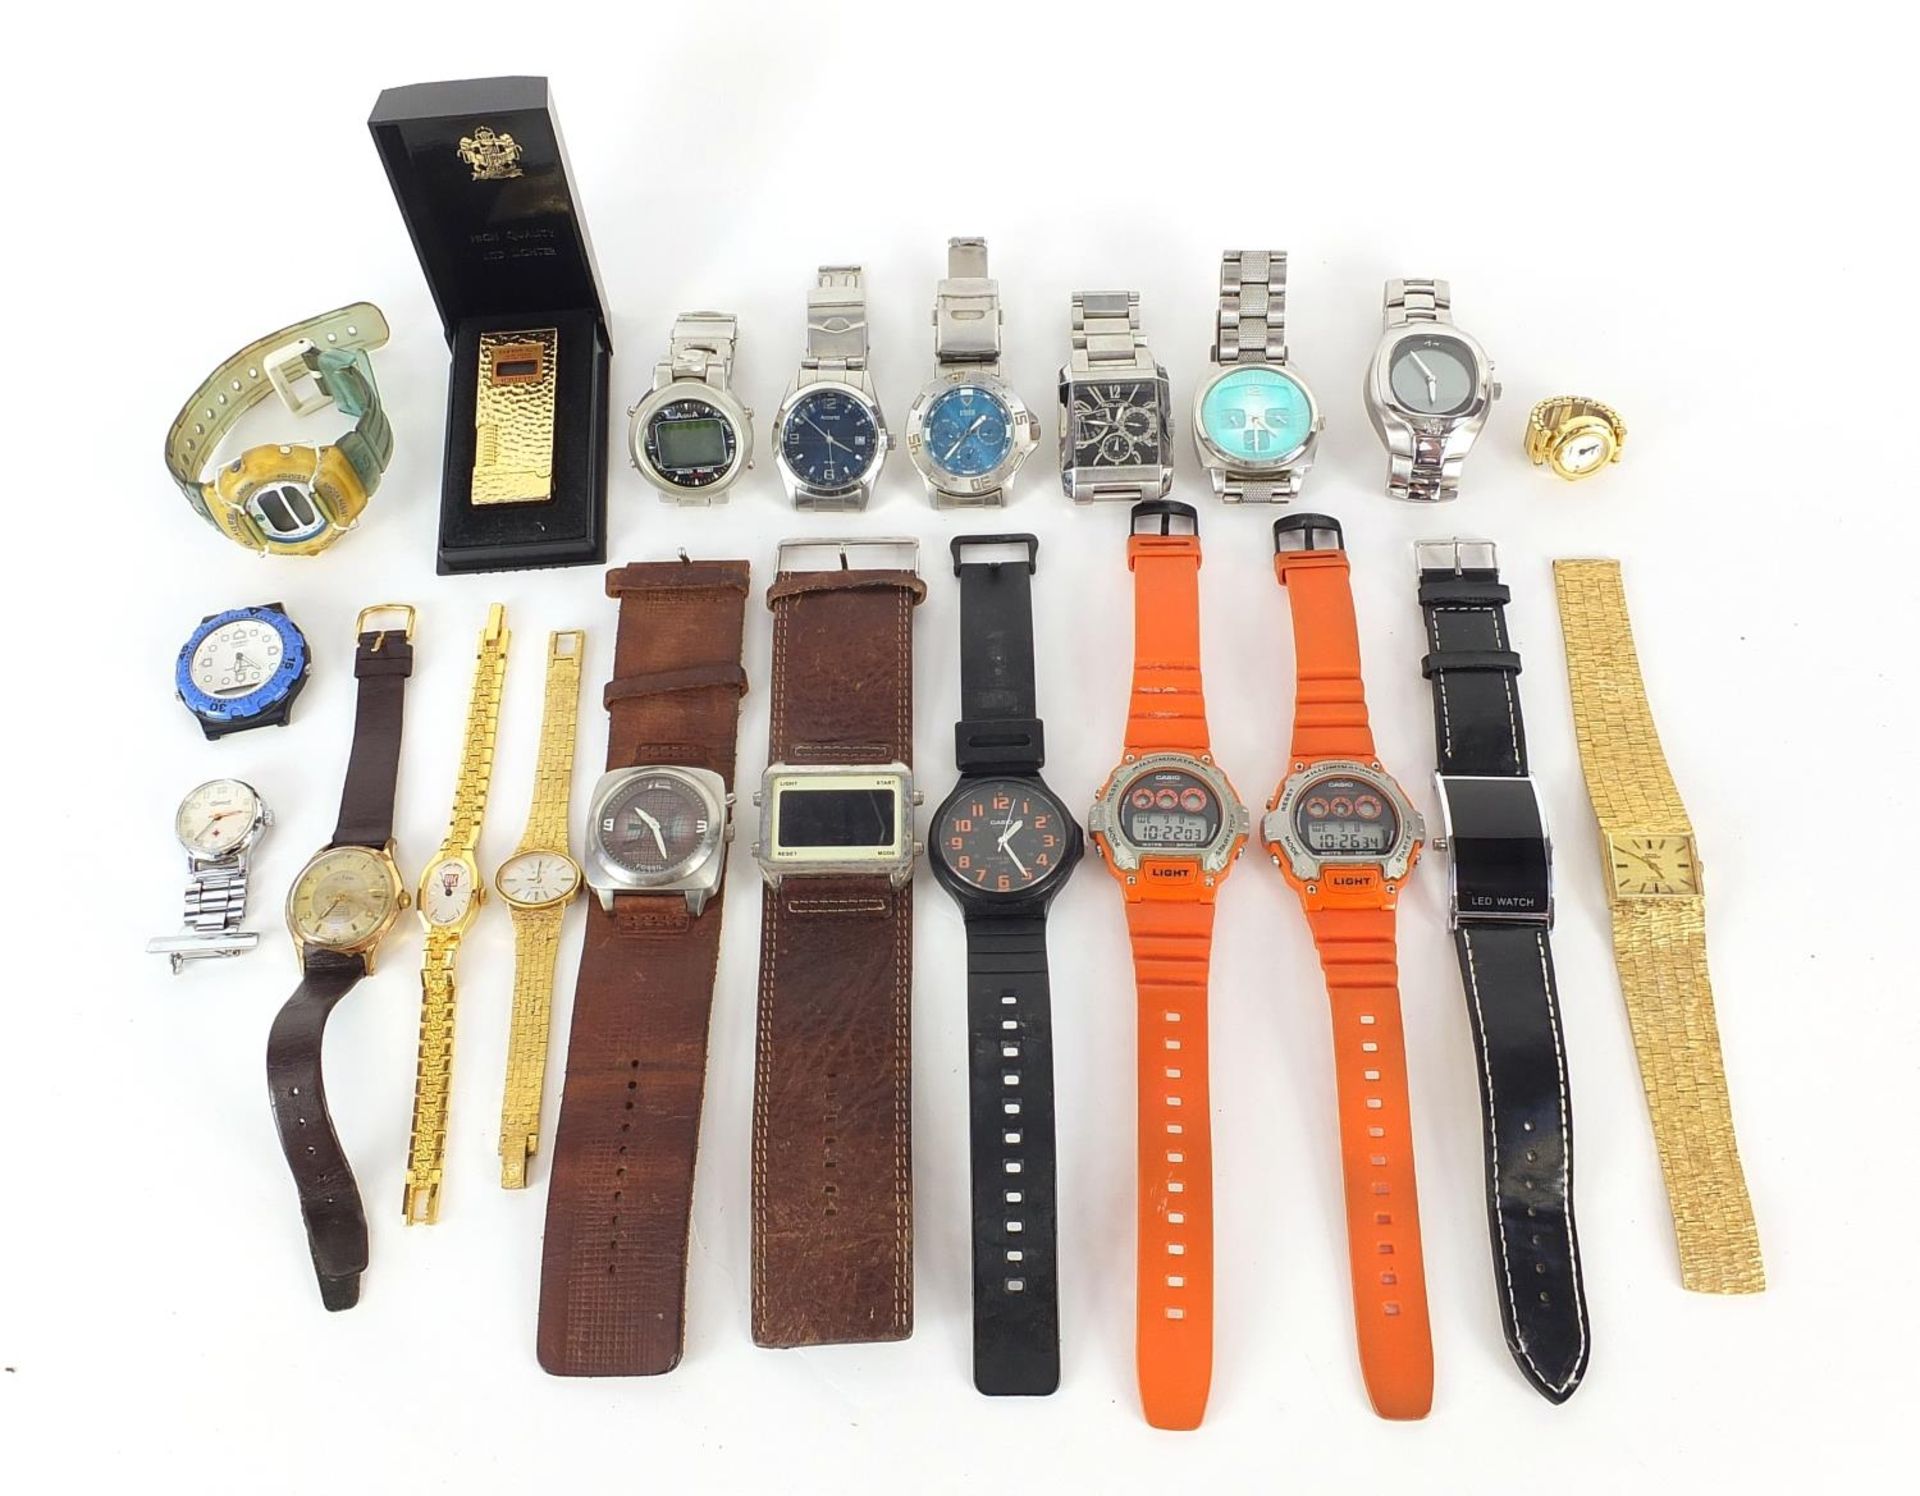 Wristwatches including Casio, Police and Fossil